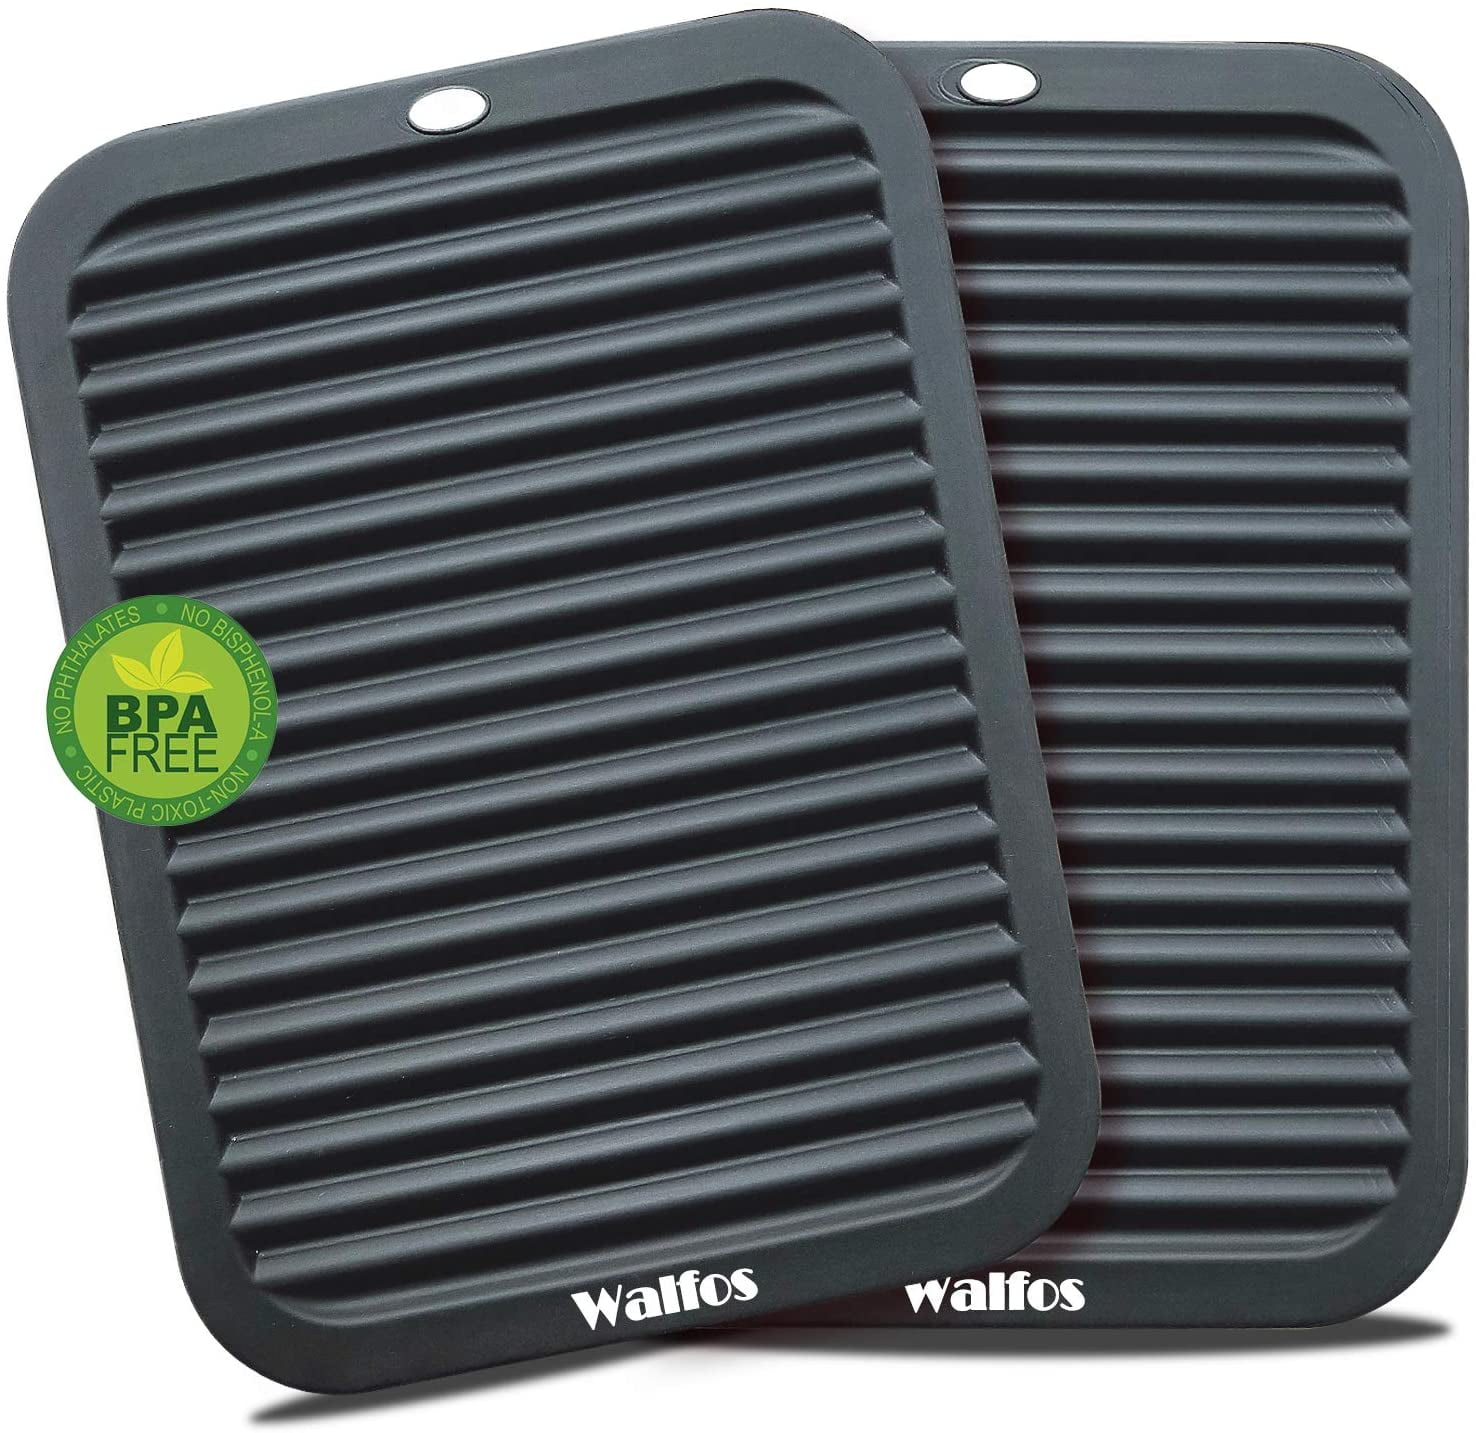 Walfos Trivets for Hot Dishes Multi-Purpose Silicone Trivet Heat Resistant  an